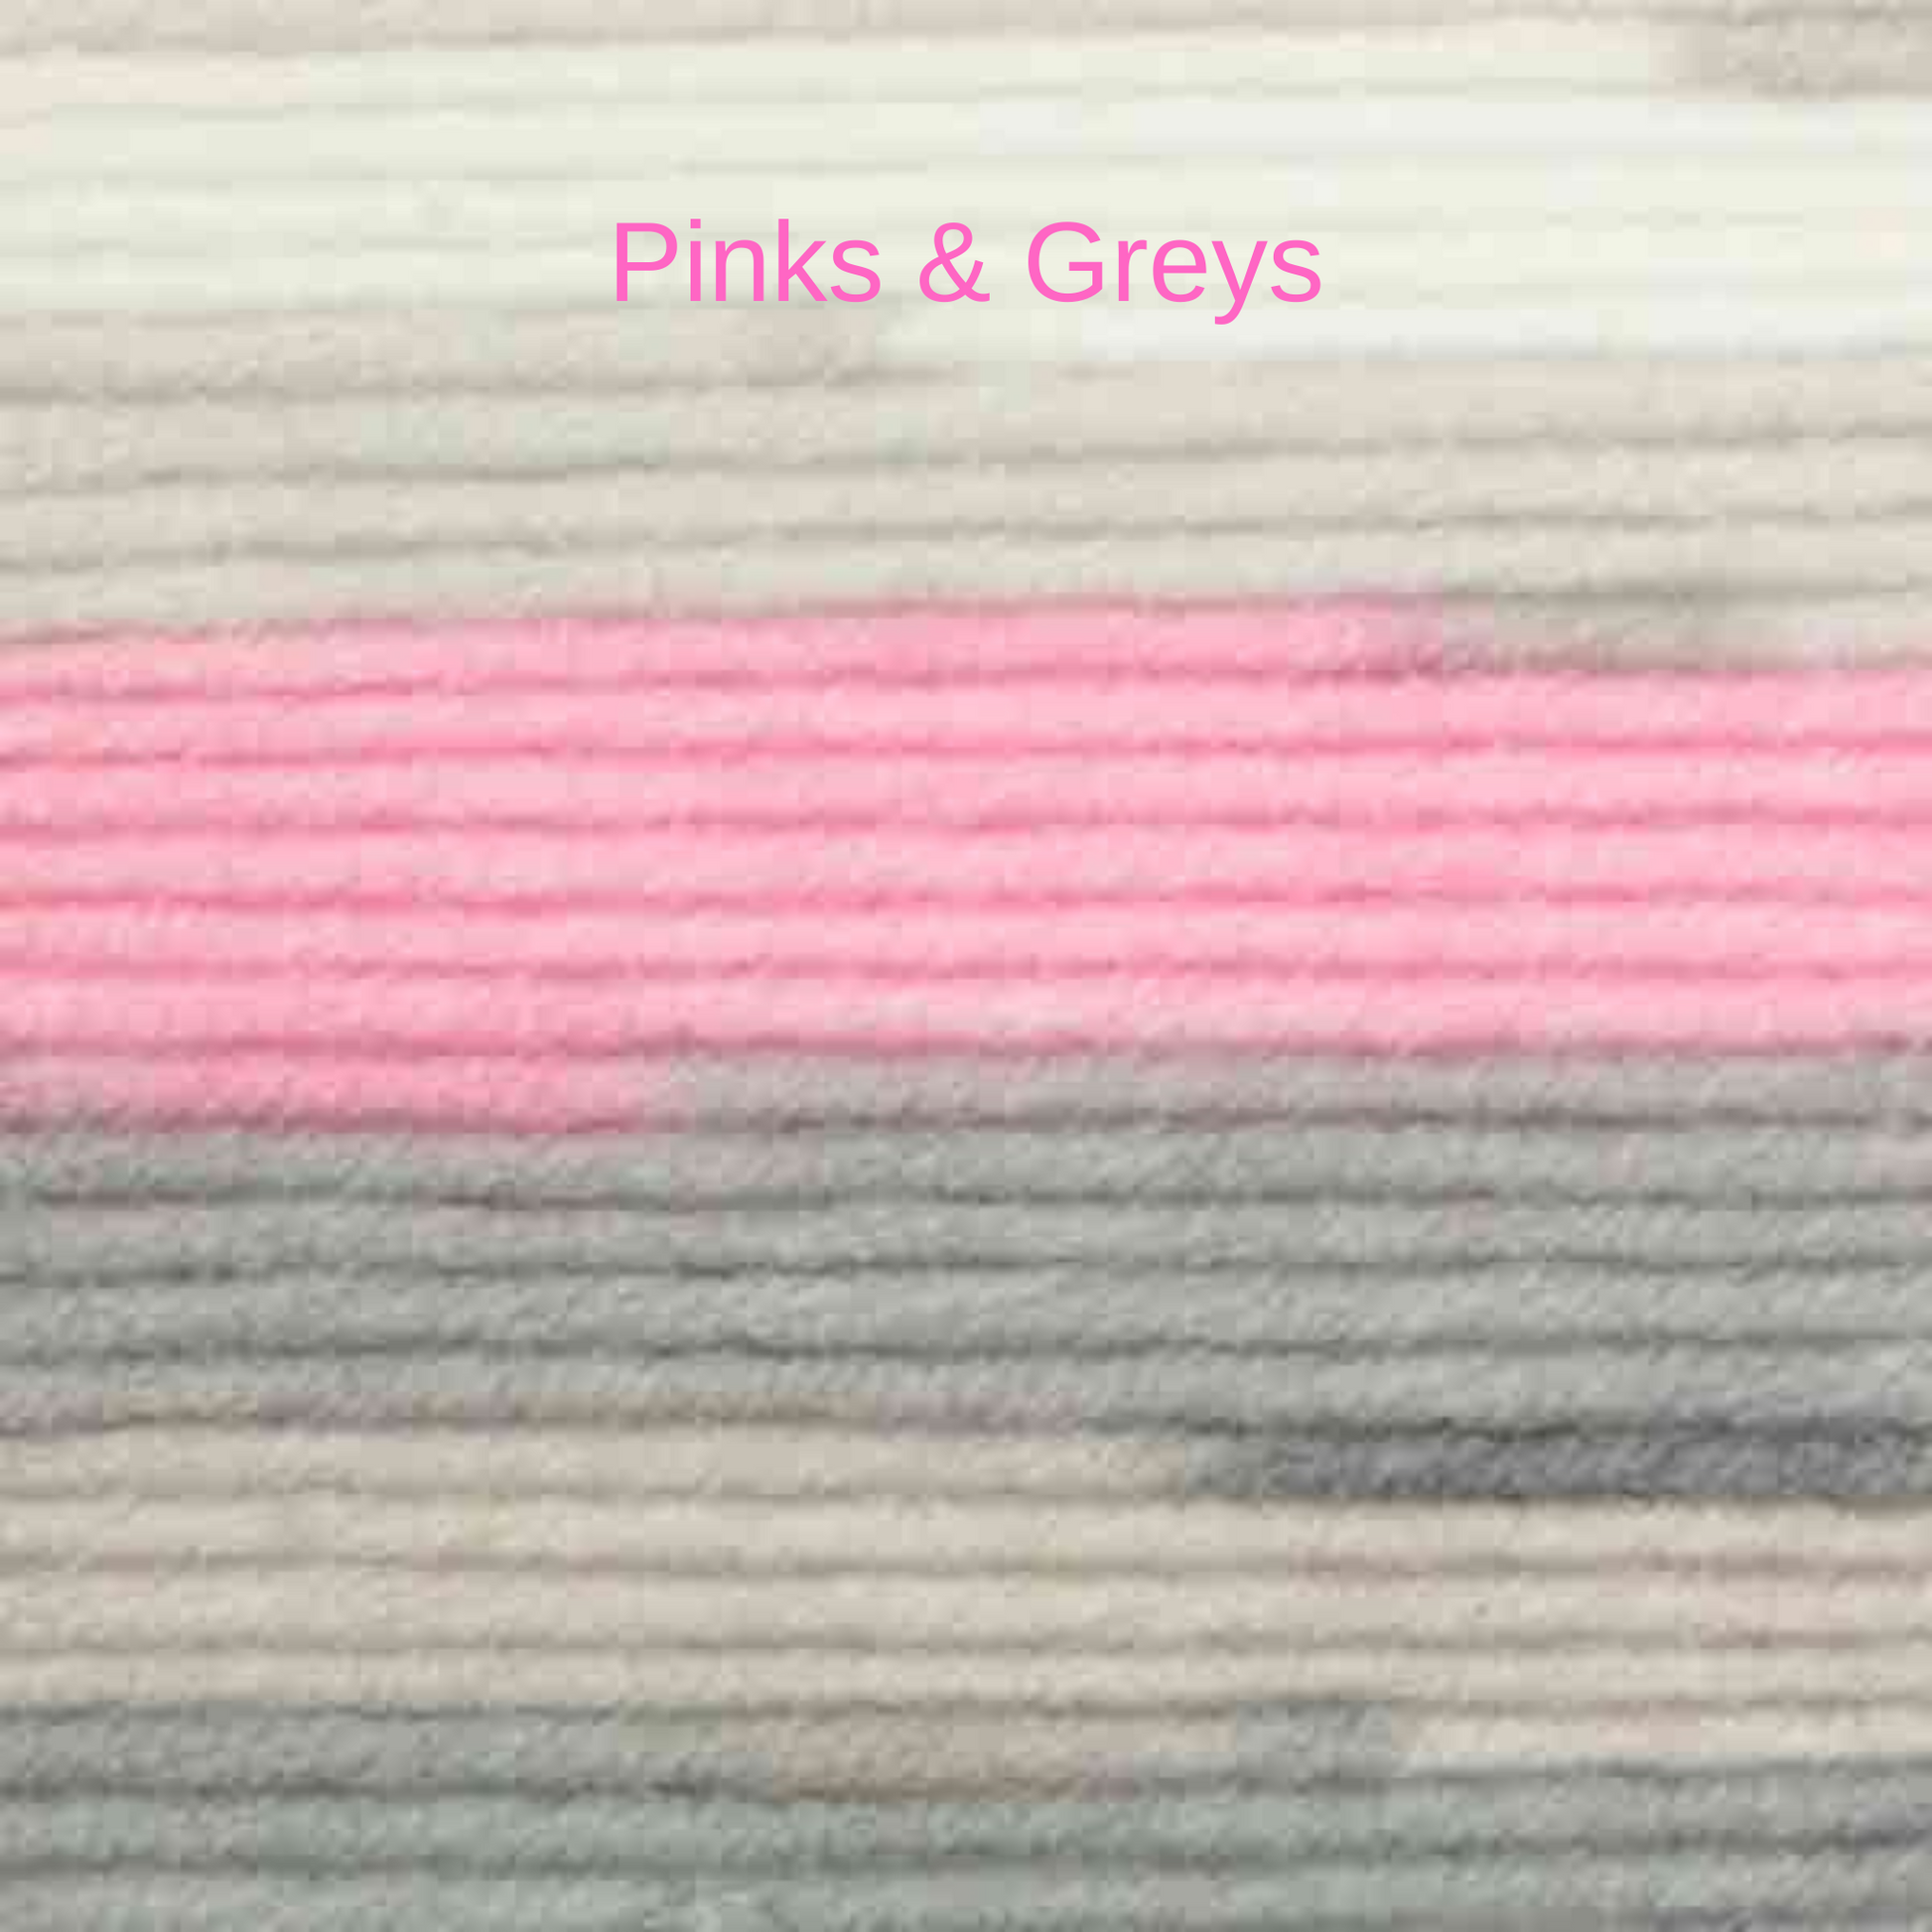 Colours in Rainbow Pink &  Greys Wool option - white, light grey, pink and darker grey